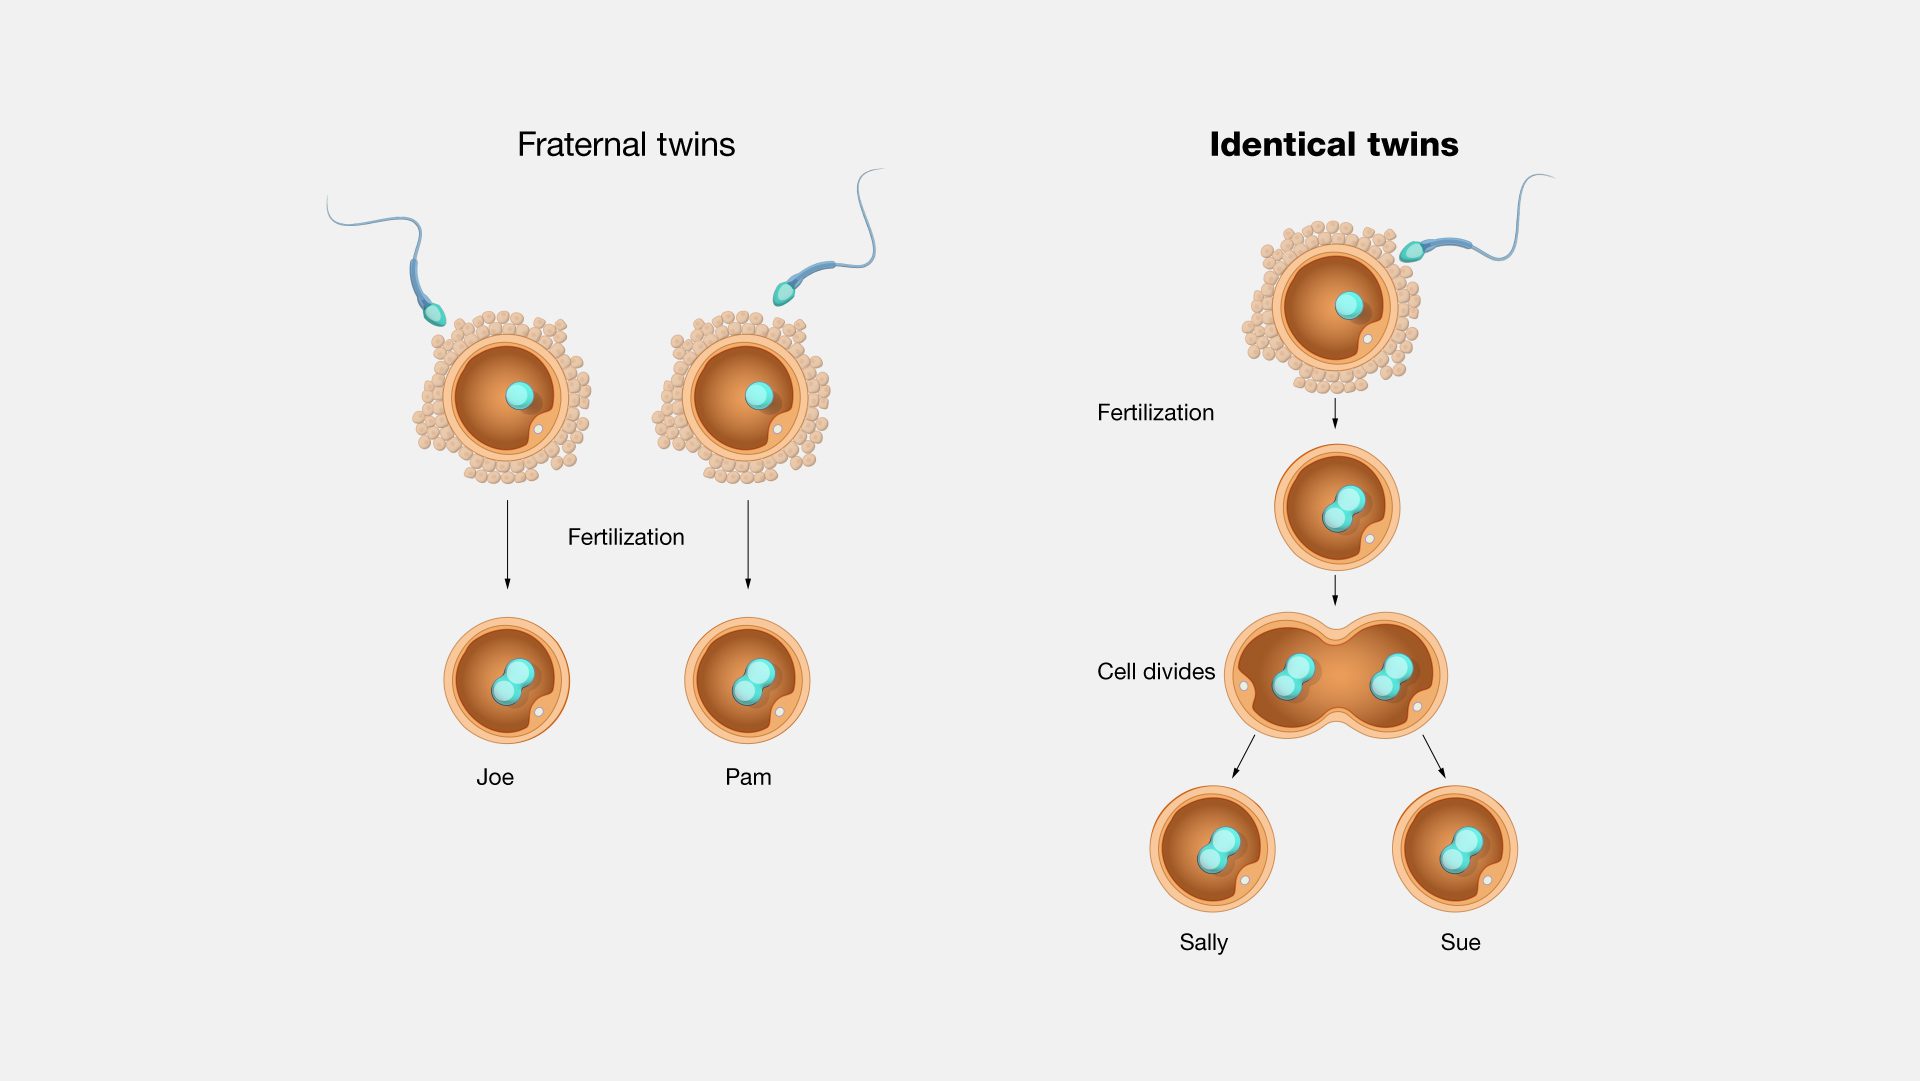 Diagram explaining fraternal and identical twins